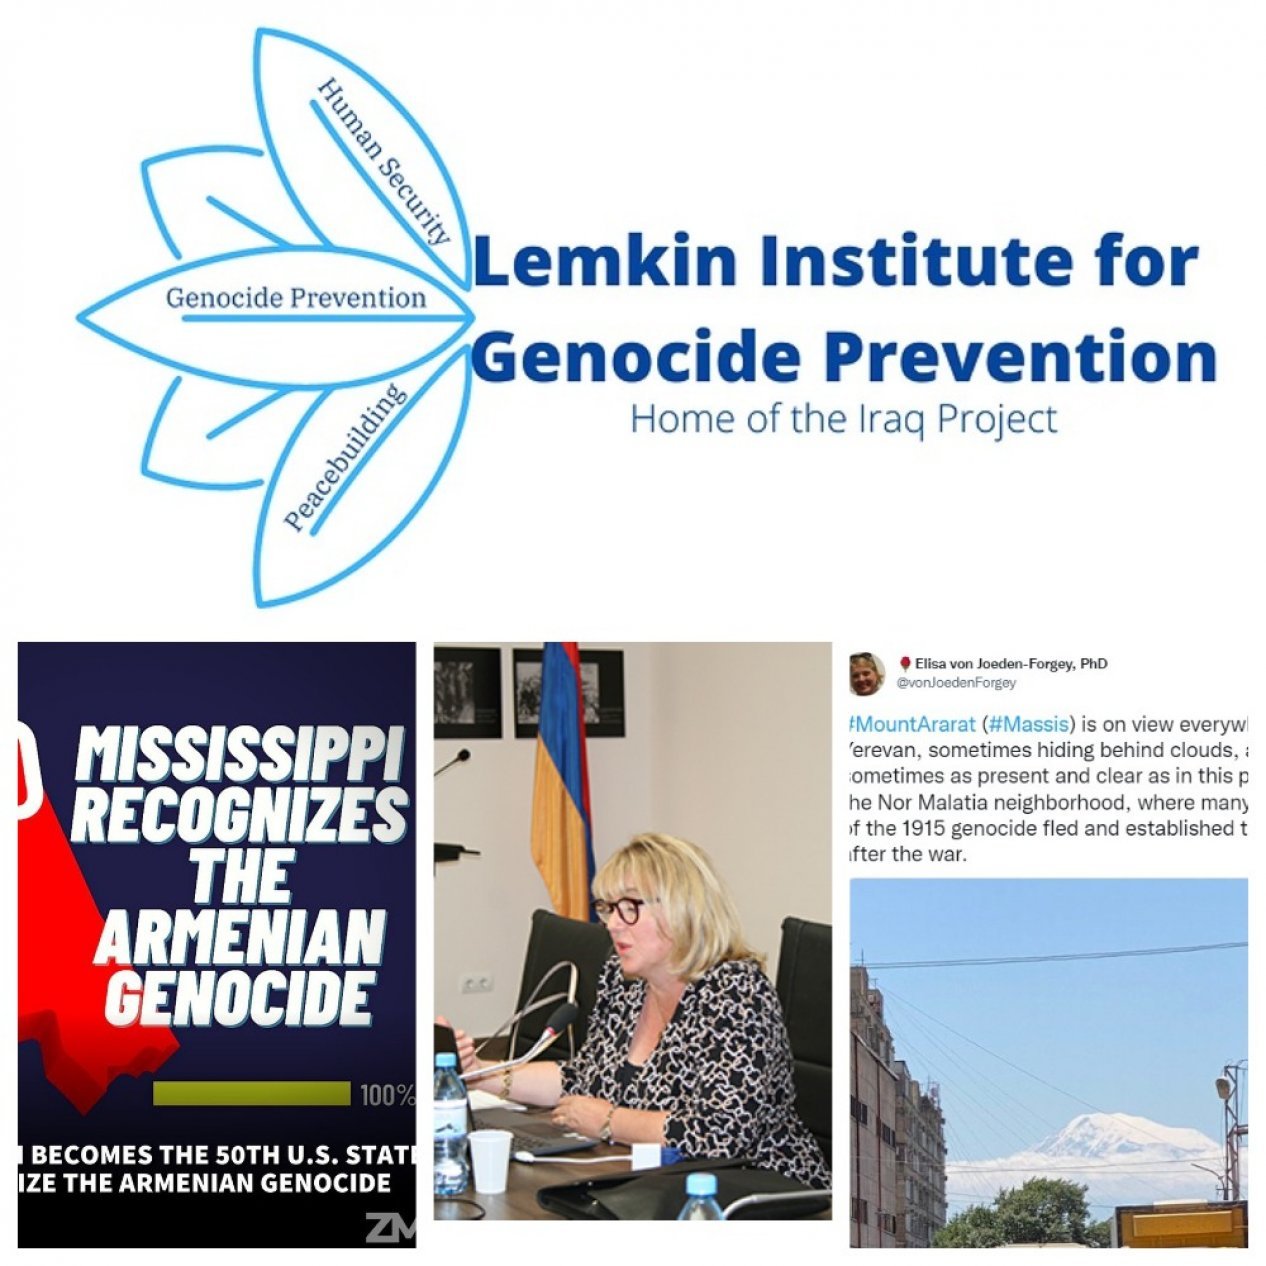 Are the claims of the Lemkin Genocide Prevention Institute about Azerbaijan true?!